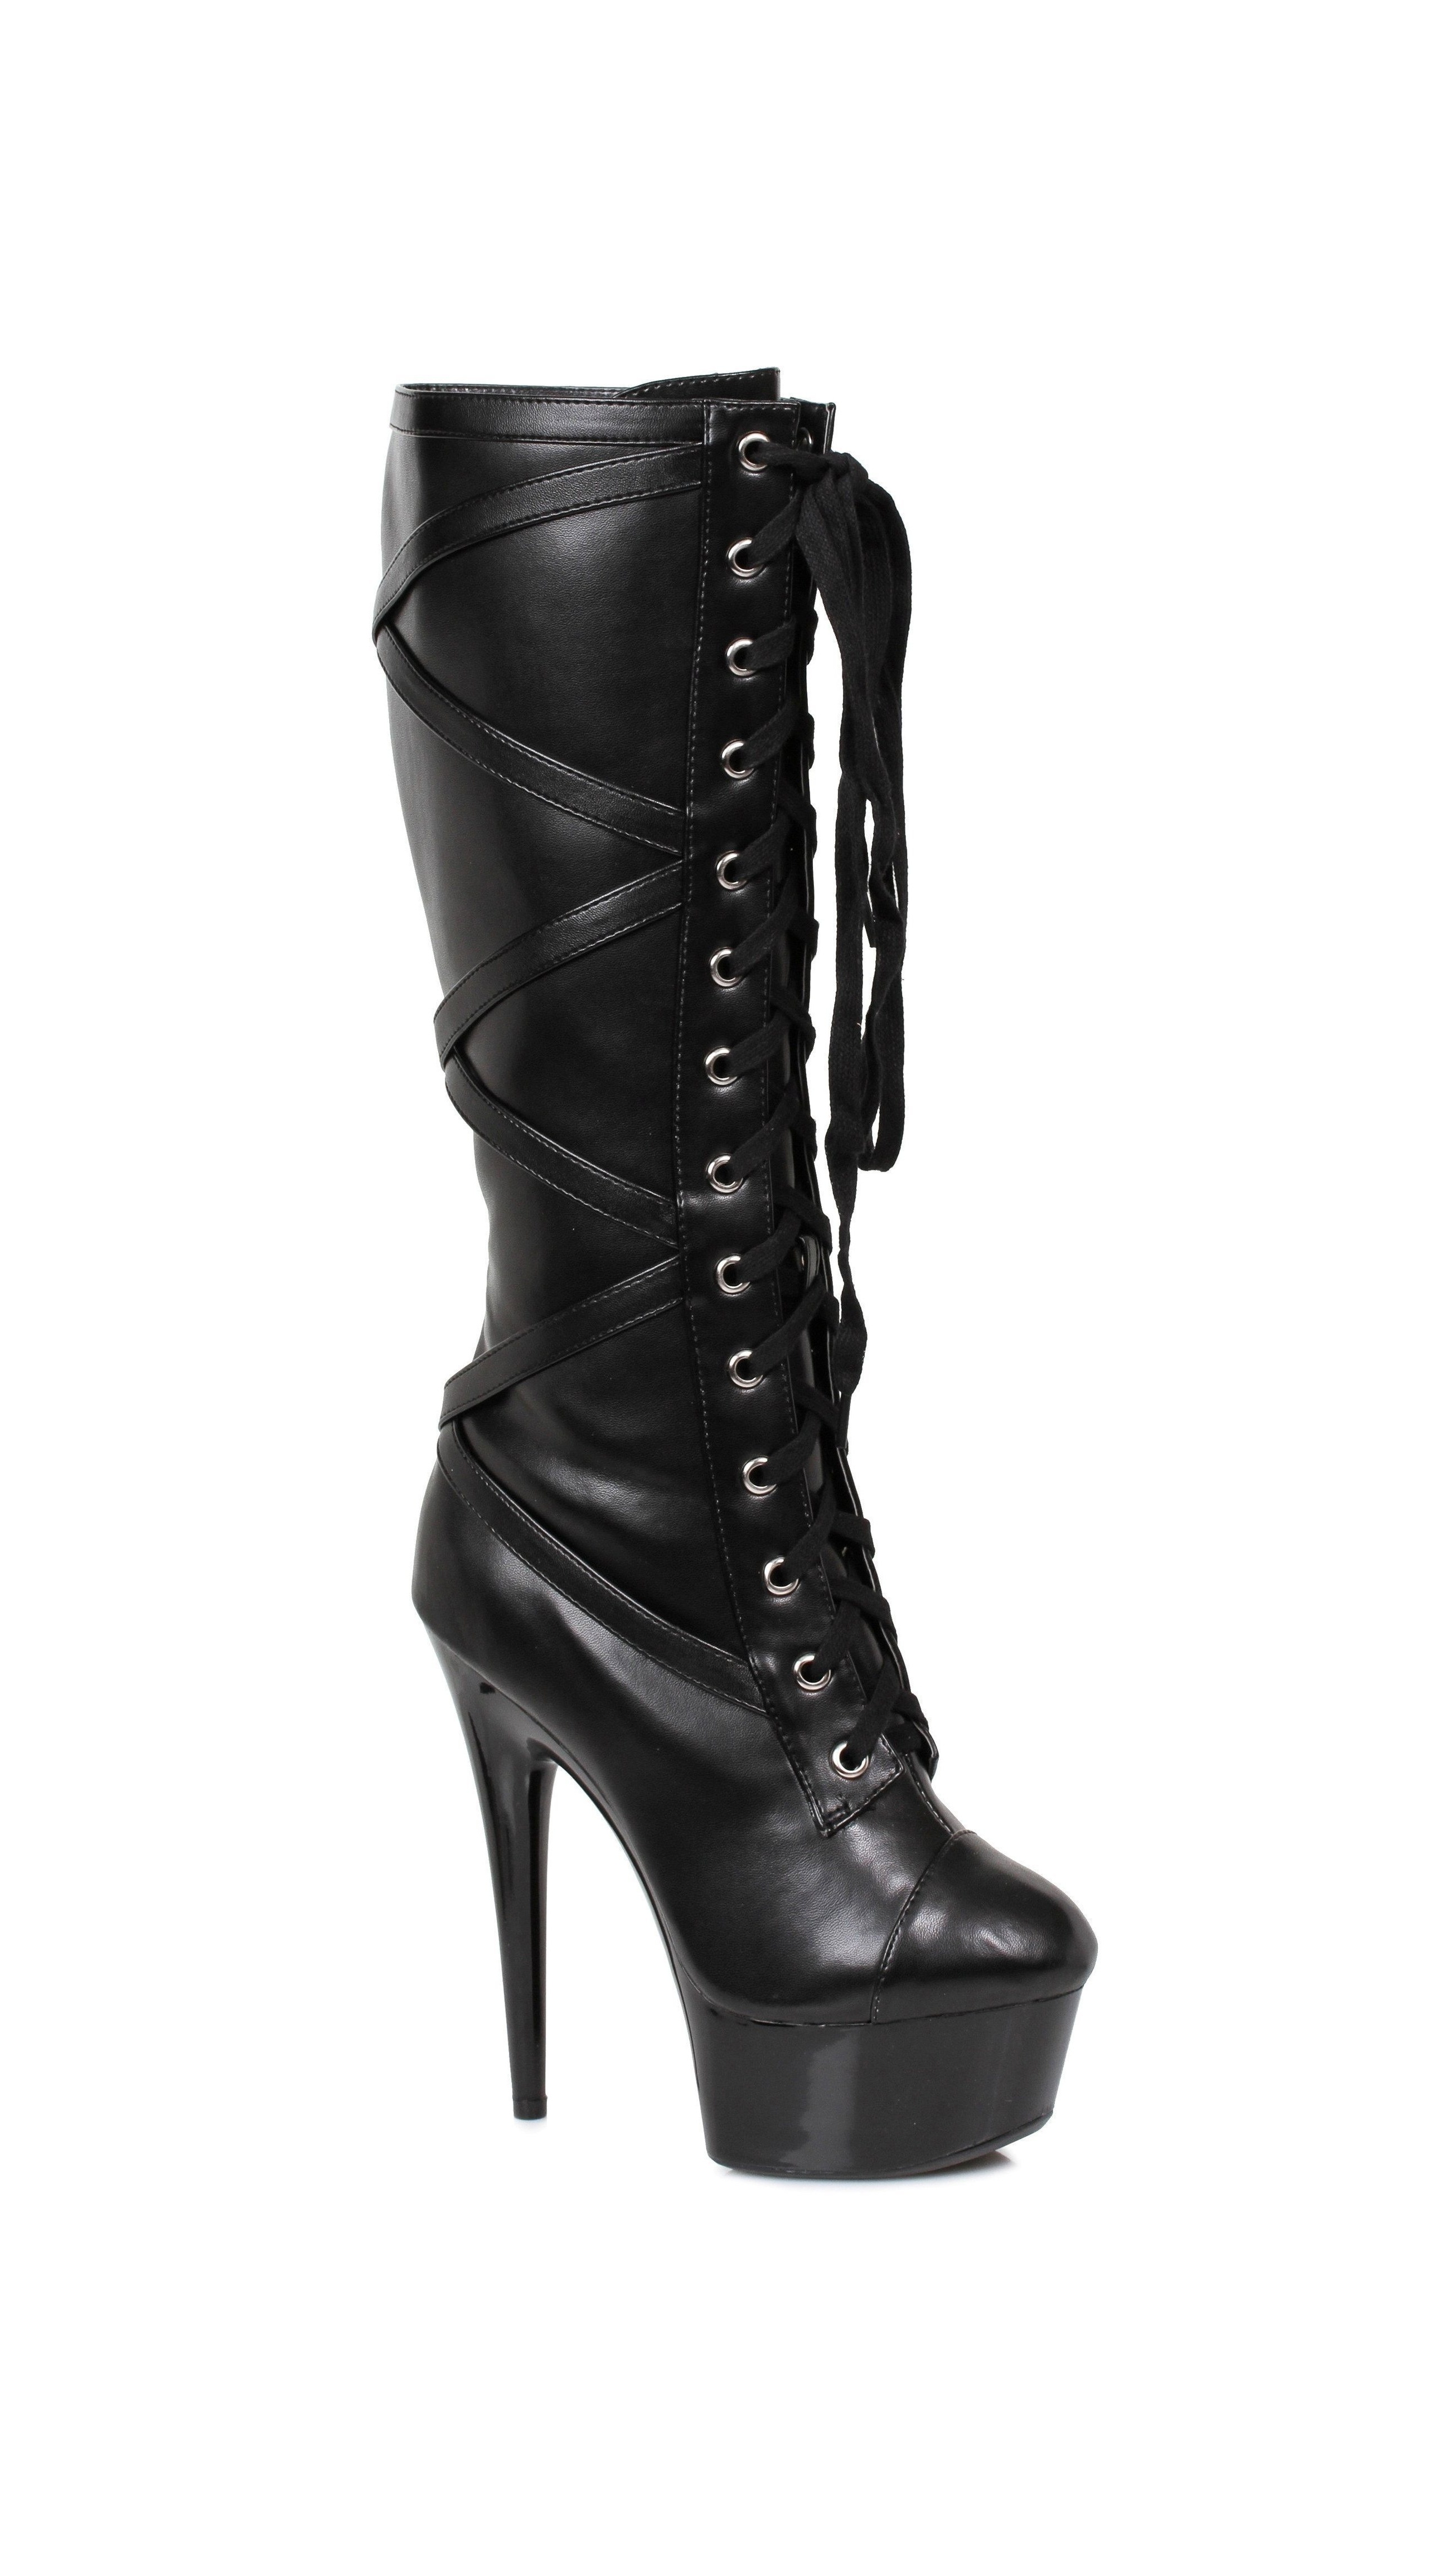 609-POCKY, 6" Lace Up Platform Boot With Inner Pocket - image 2 of 2